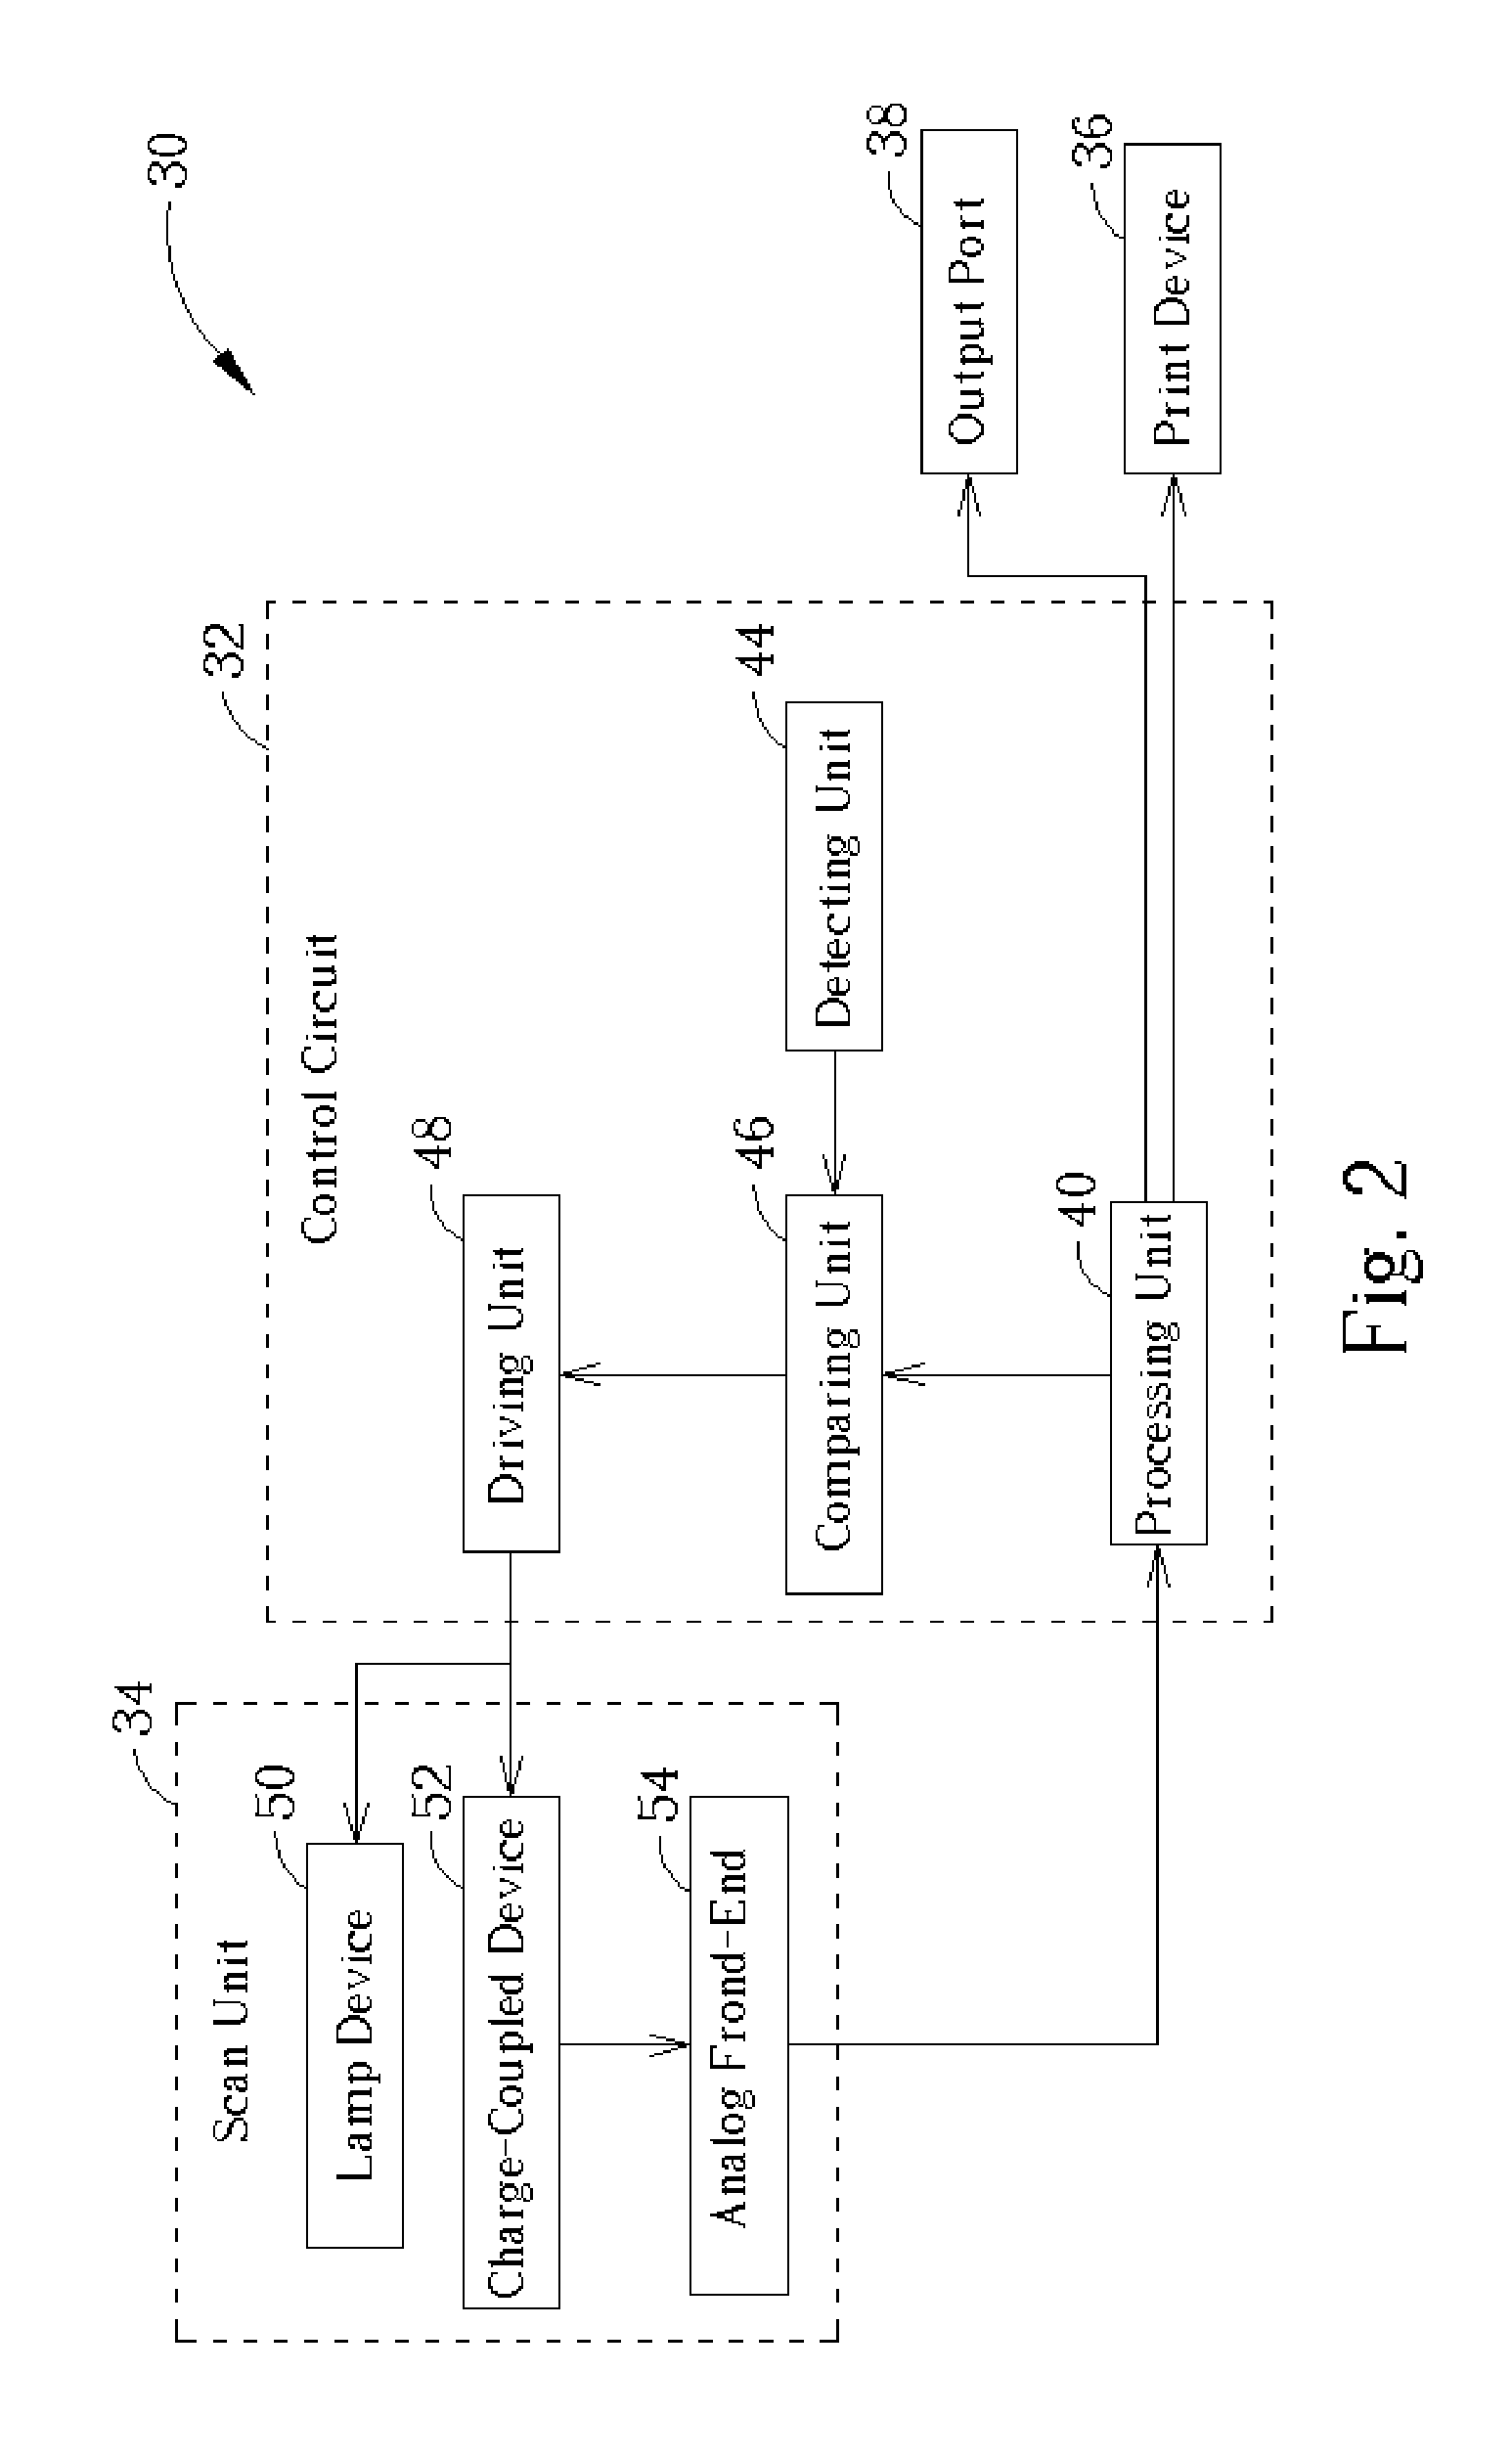 Method and apparatus for improving quality of scanned image through preview operation